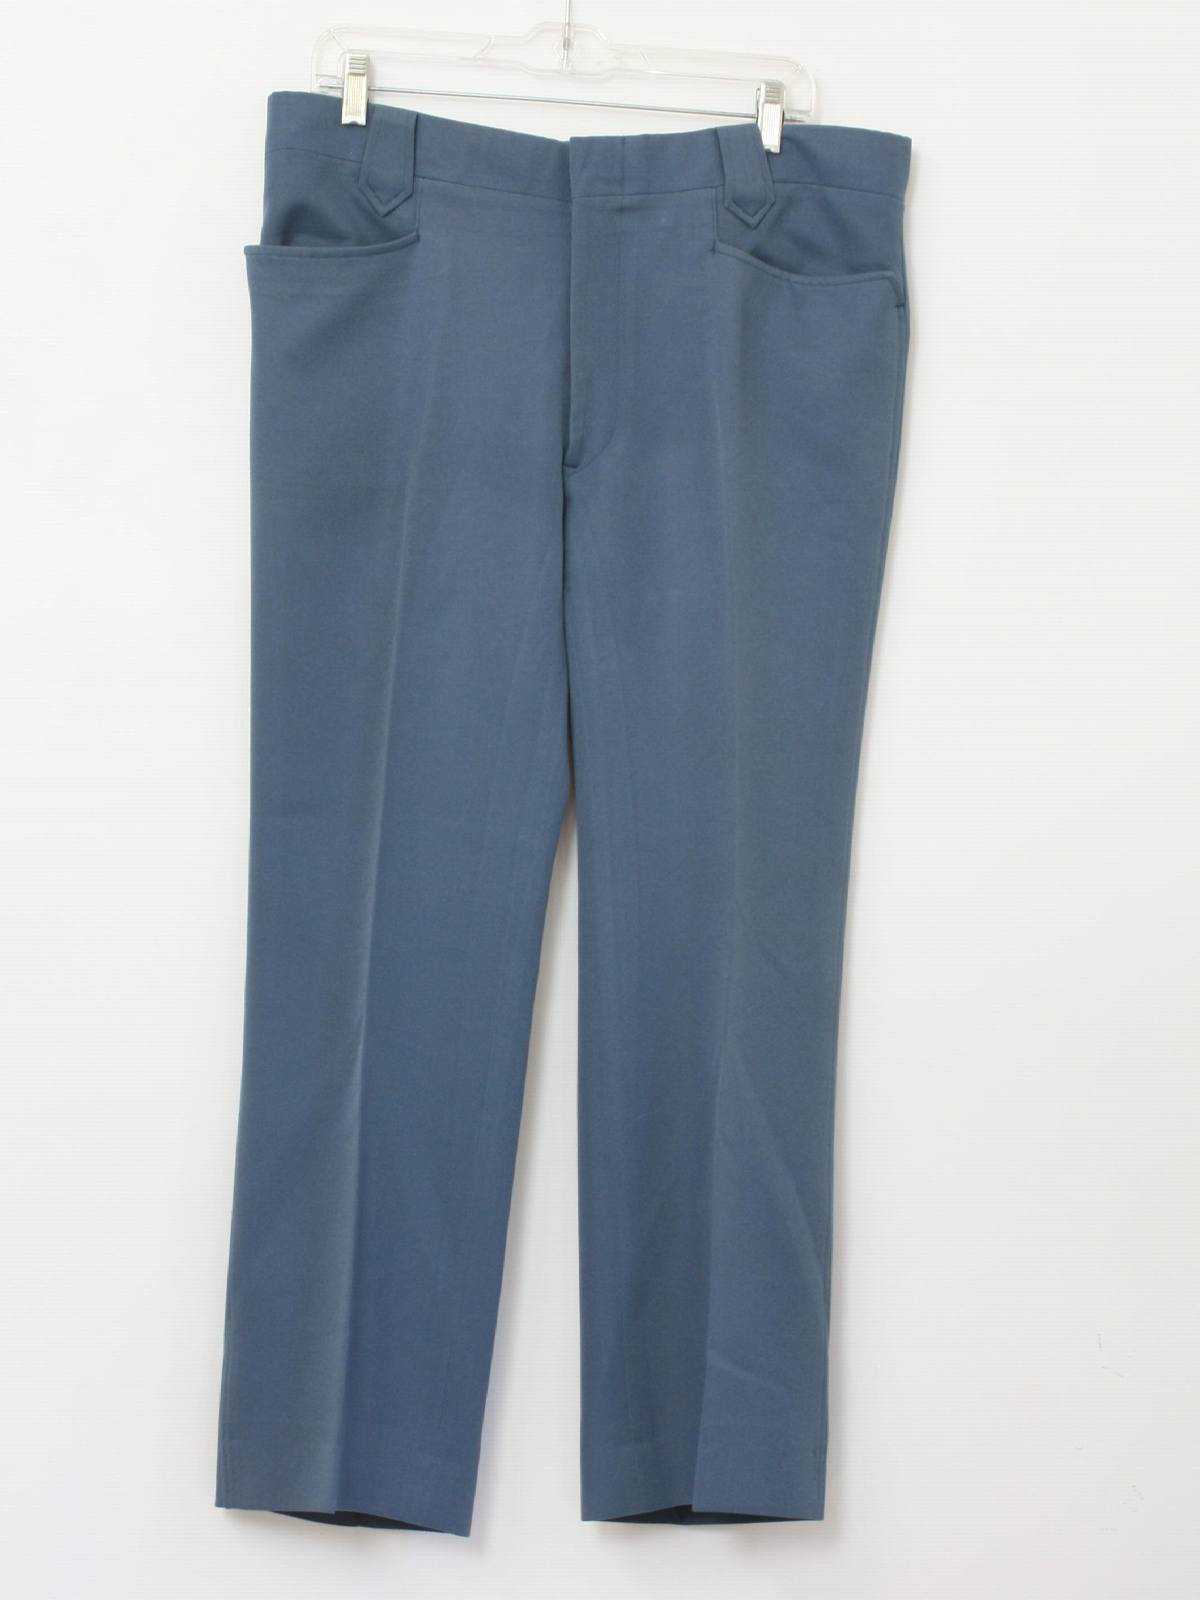 Stetson Seventies Vintage Flared Pants / Flares: 70s -Stetson- Mens ...